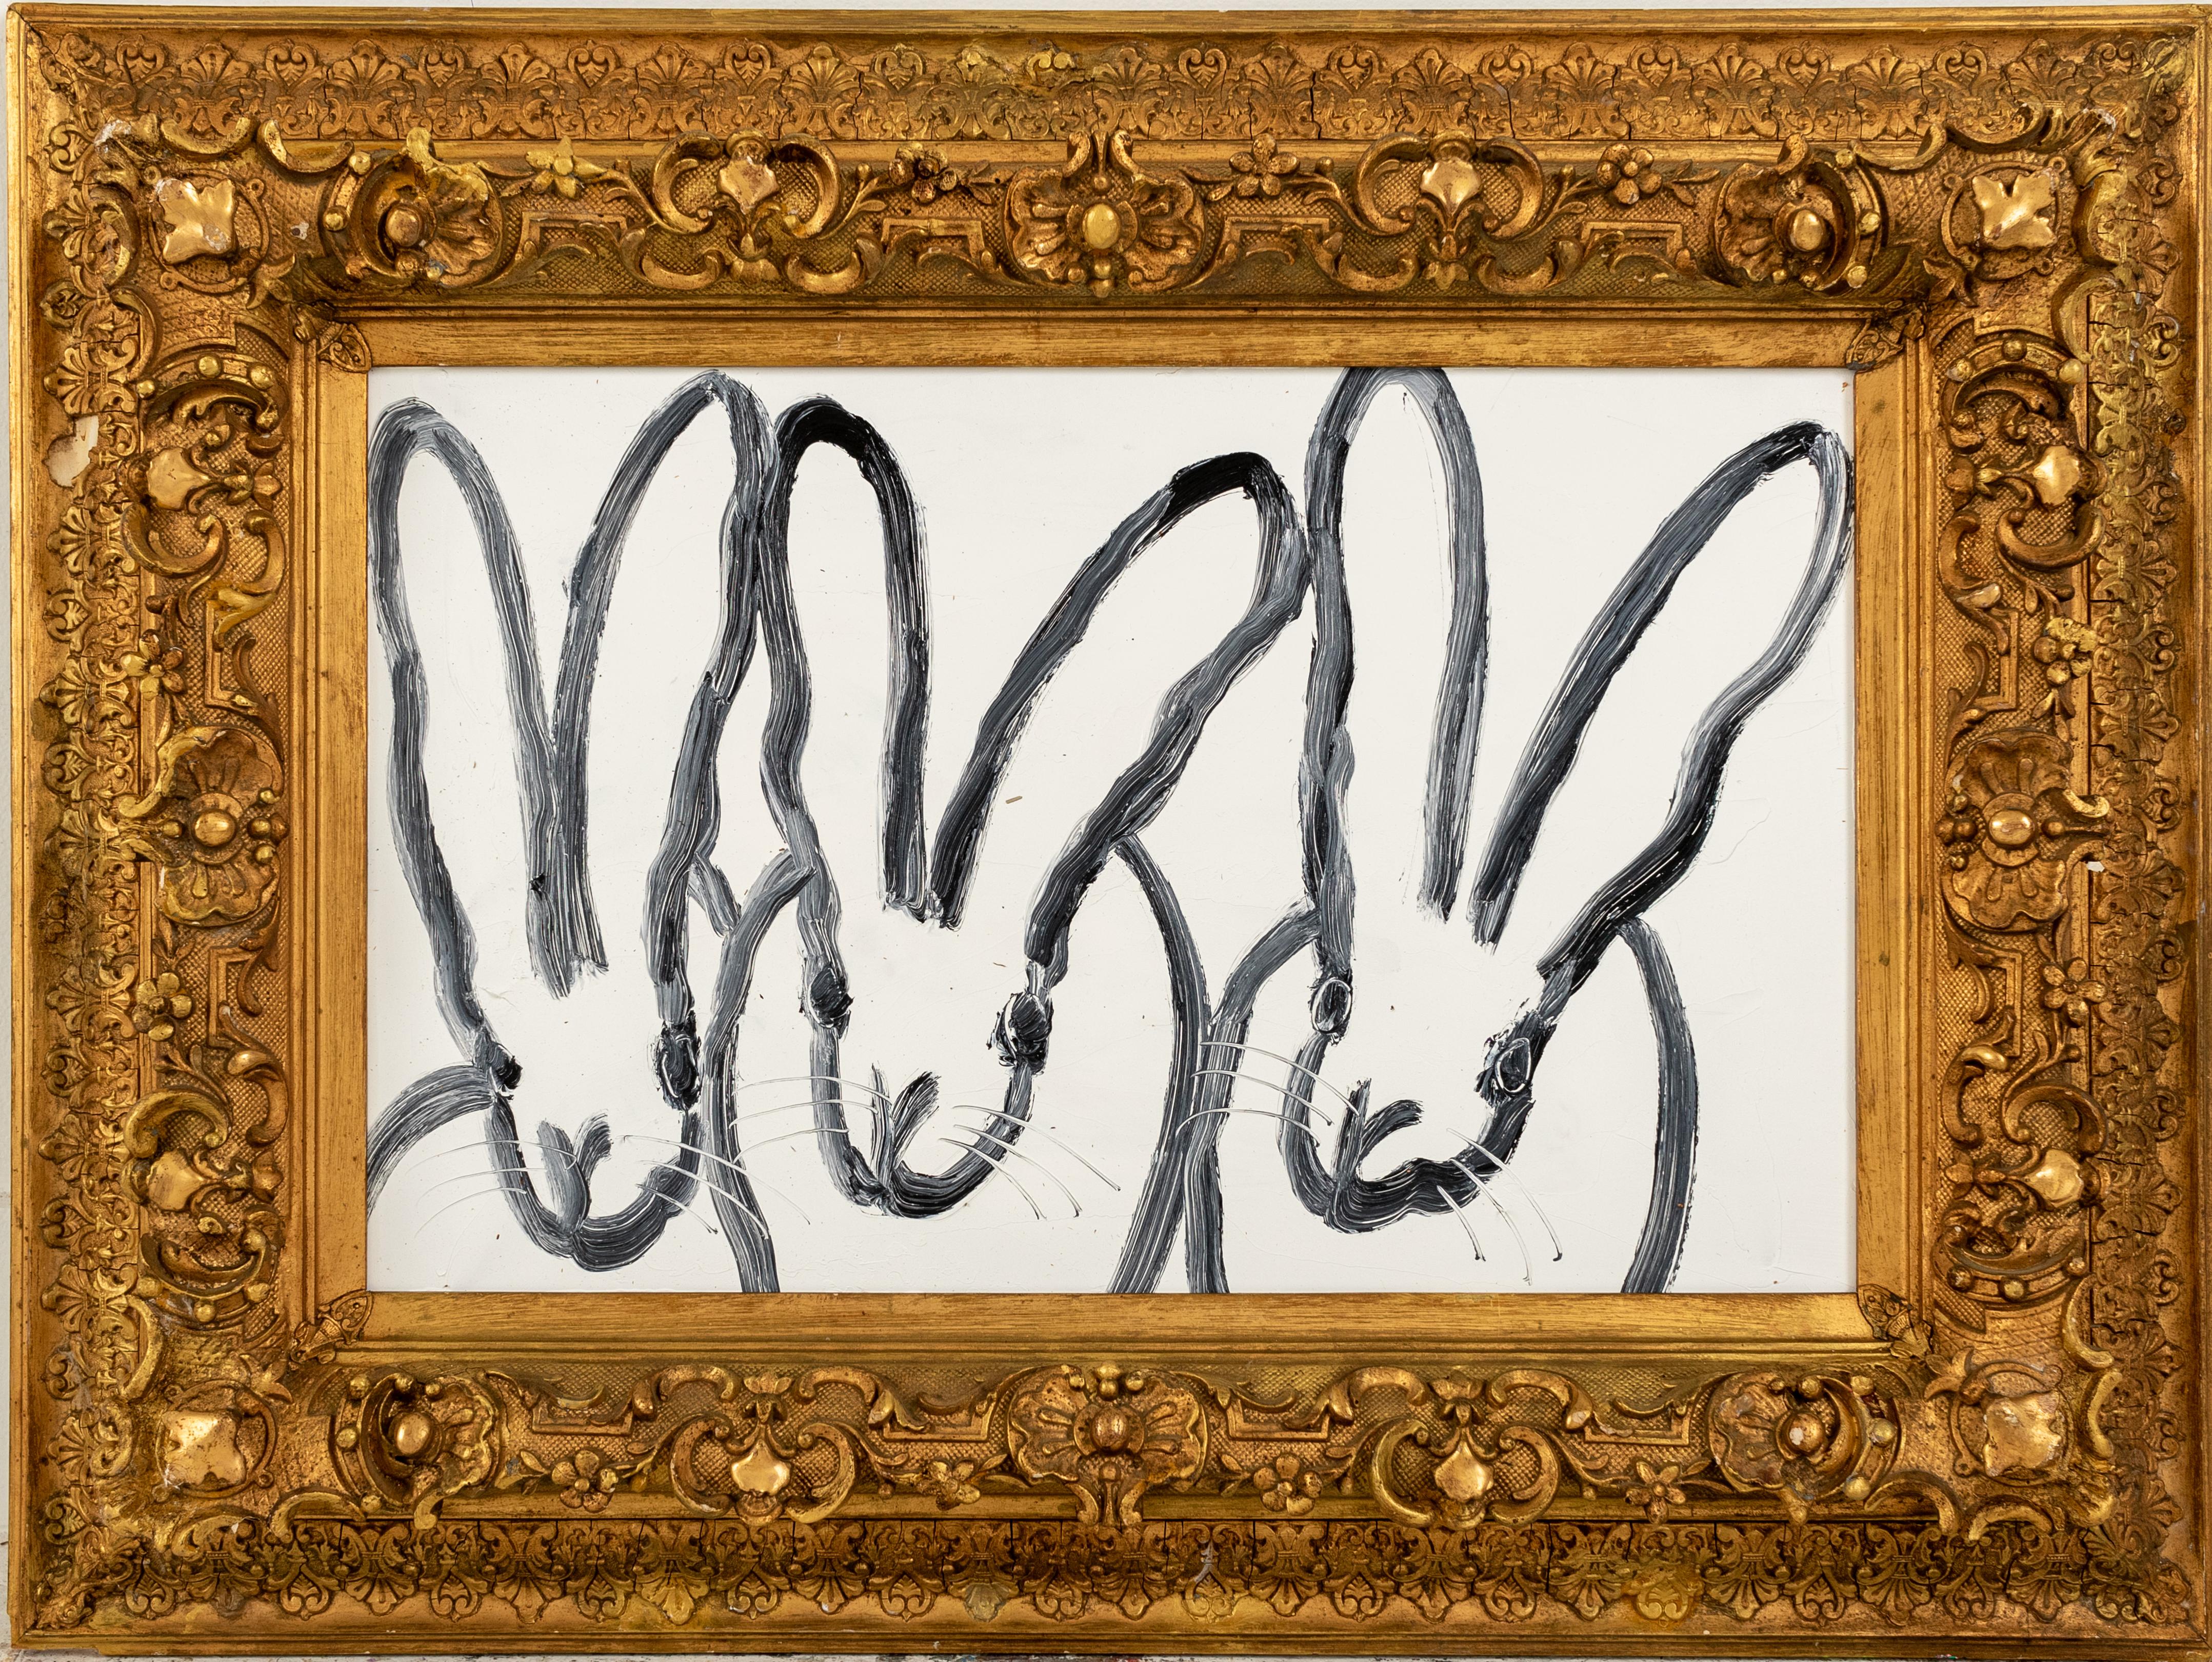 Hunt Slonem "Hutch" Tripple Bunnies
Black outlined bunnies on white background in gold antique frame

Unframed: 15 x 23.25 inches
Framed: 25 x 33.25 inches

Hunt Slonem is a well-renowned American artist is known for his neo-expressionist paintings